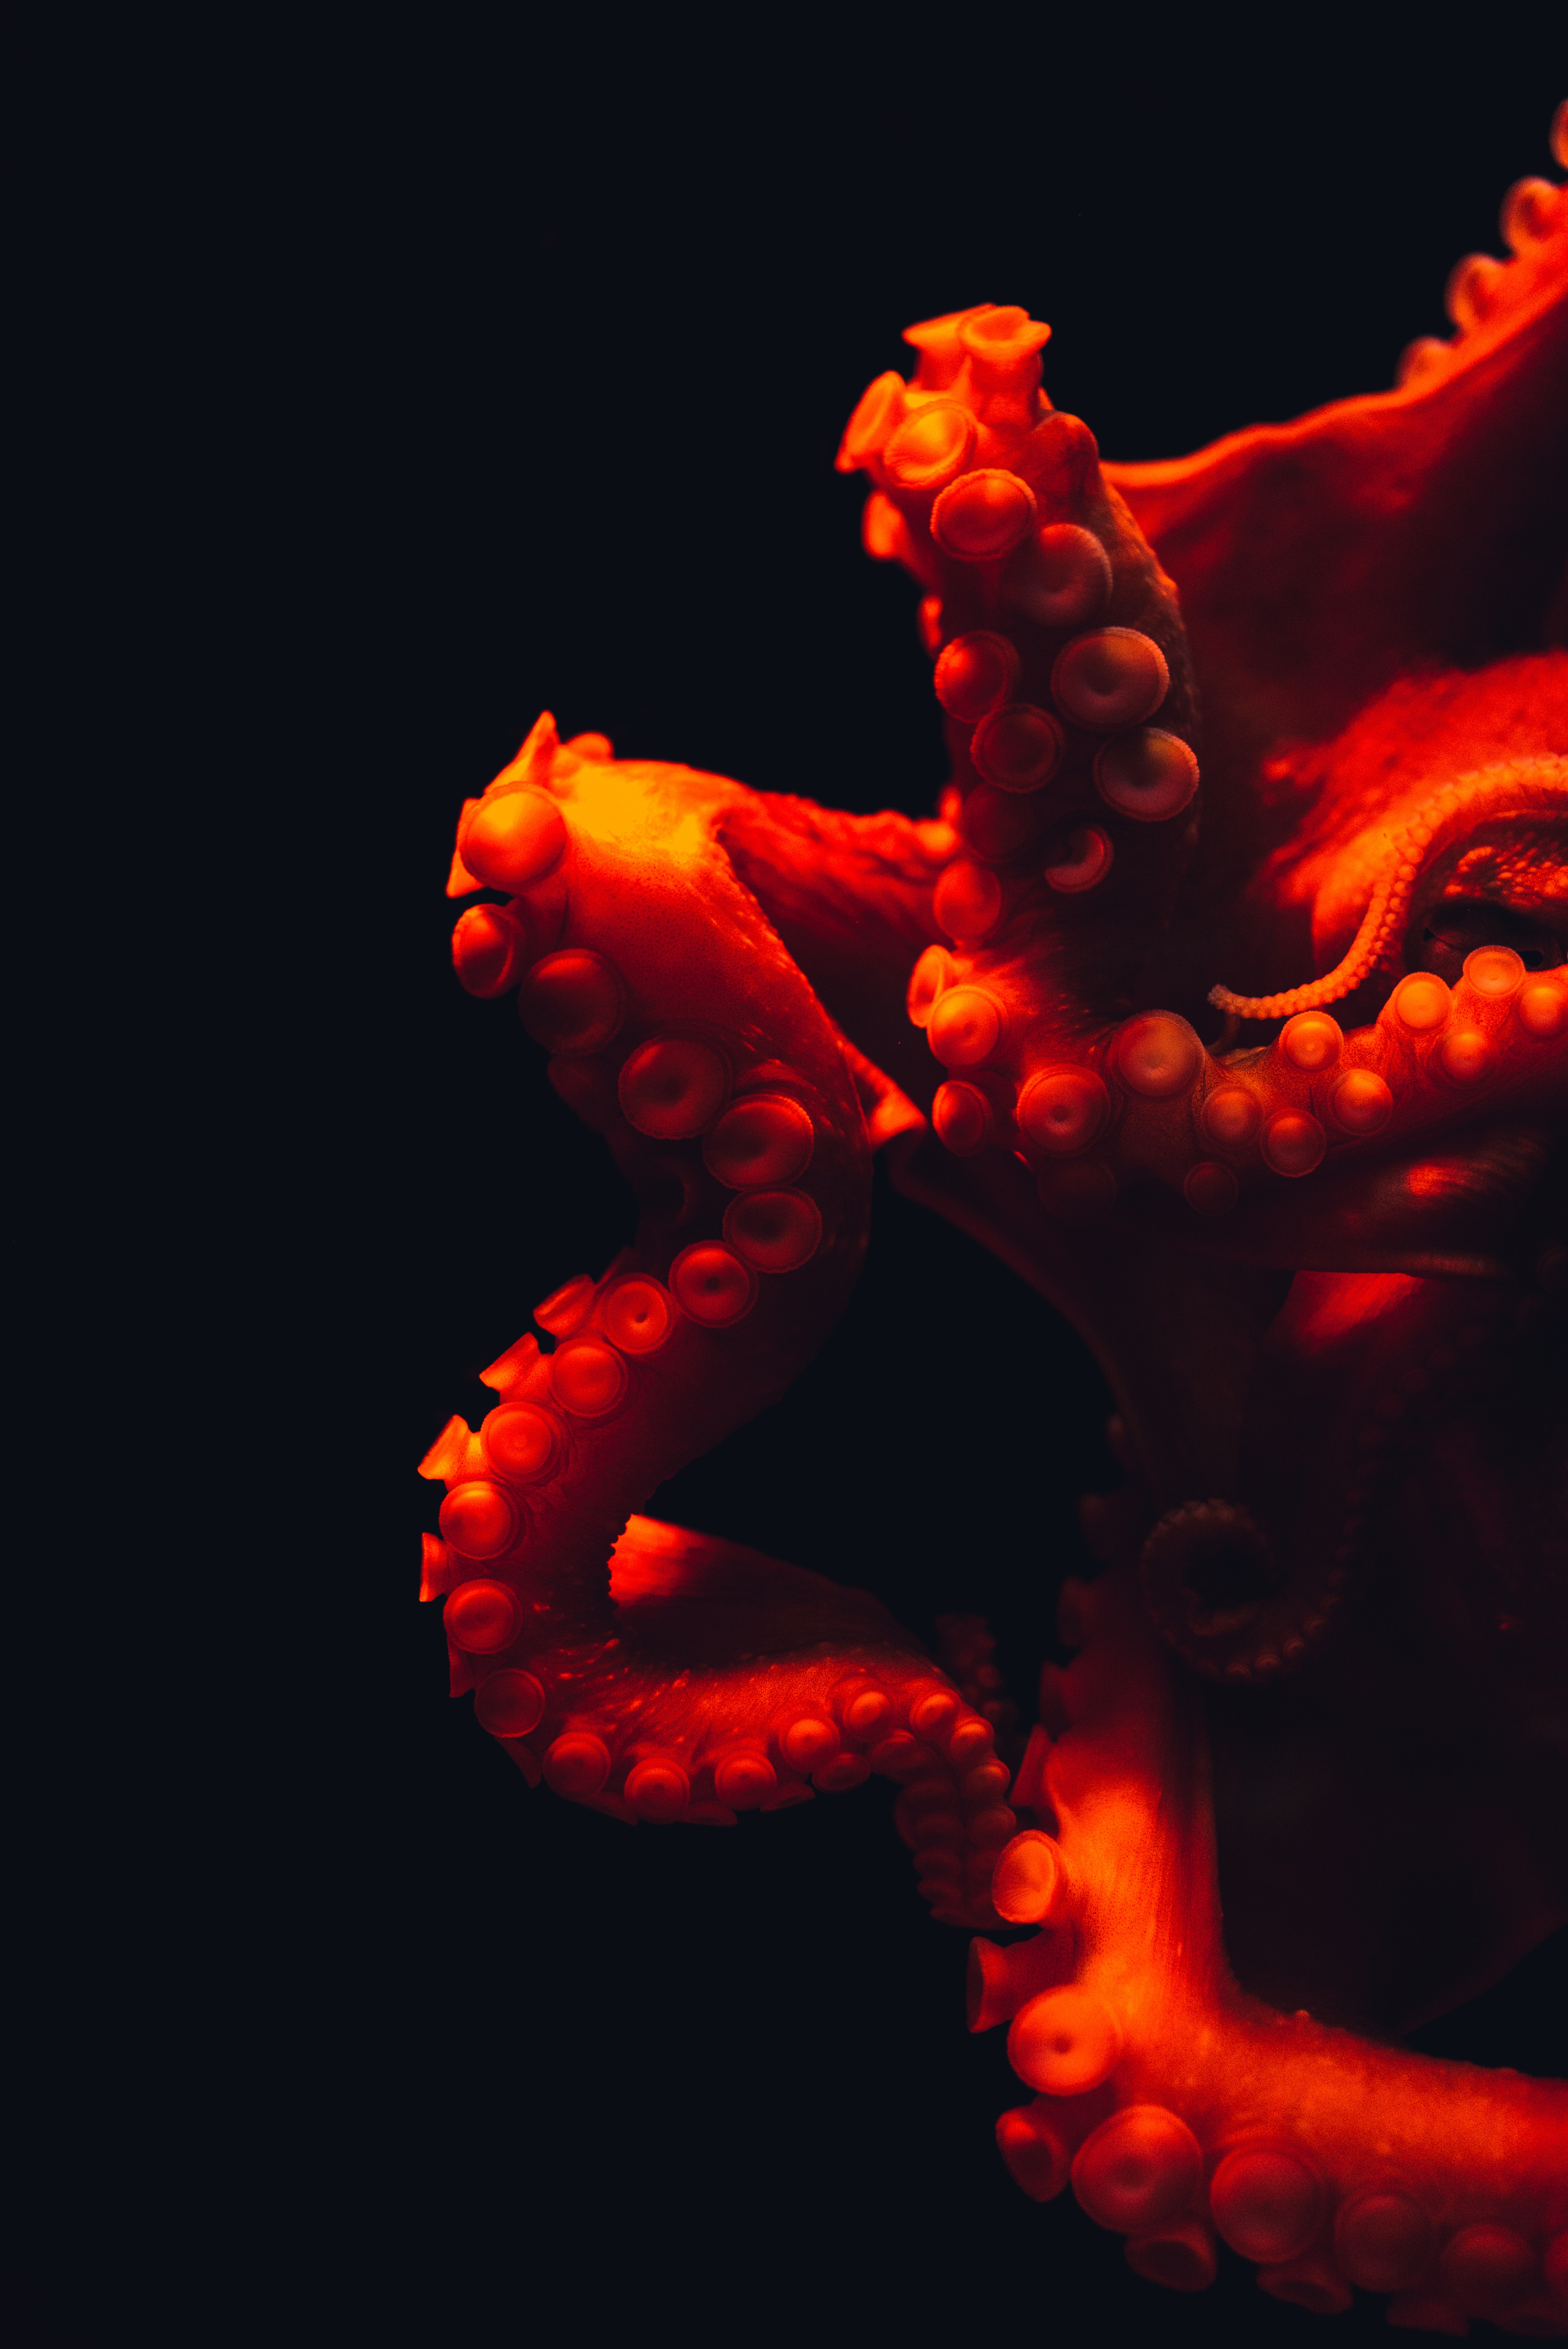 Wallpaper for mobile devices underwater world, octopus, macro, red